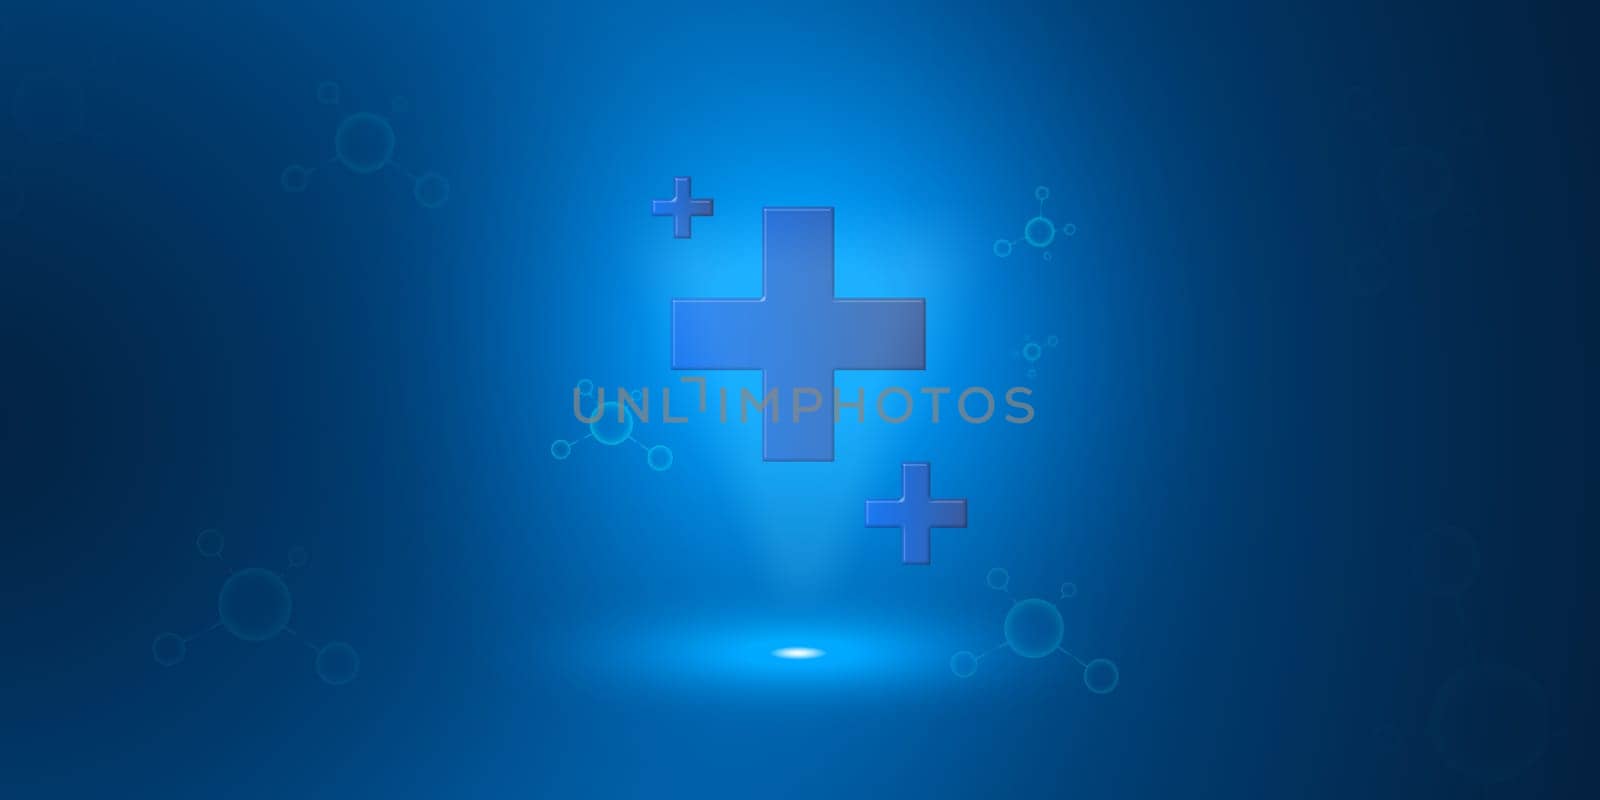 abstract health background and plus icon, concept of health insurance and medical welfare, Health insurance and access to health care, health care planning. by Unimages2527